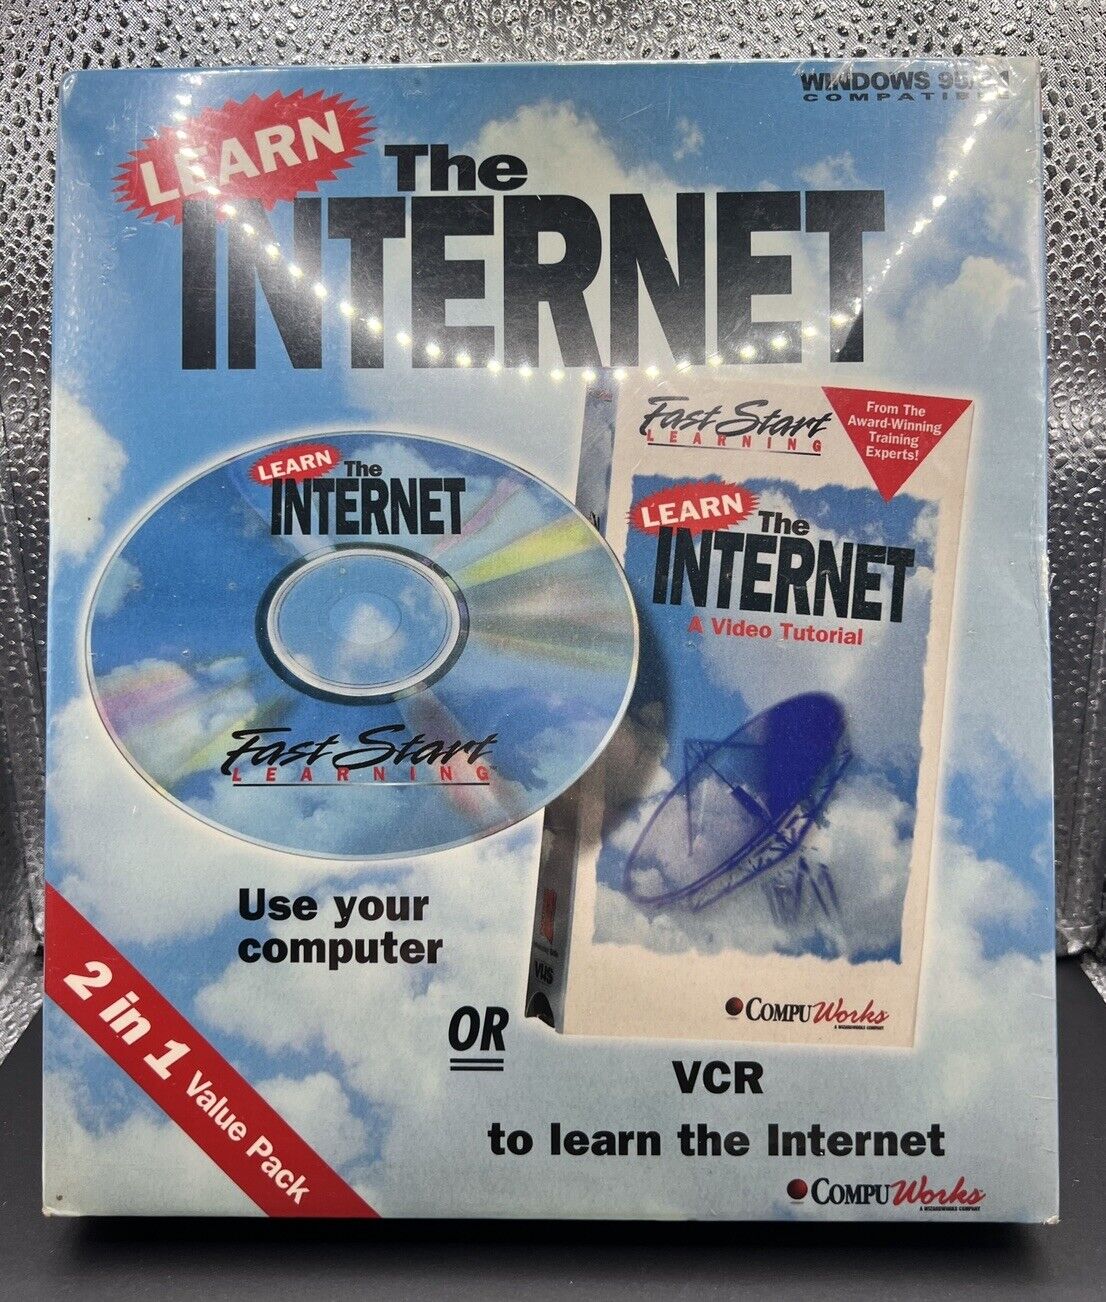 COMPUWORKS: Learn The Internet (Sealed) CD ROM and VHS COMBO for Windows 3.1/95